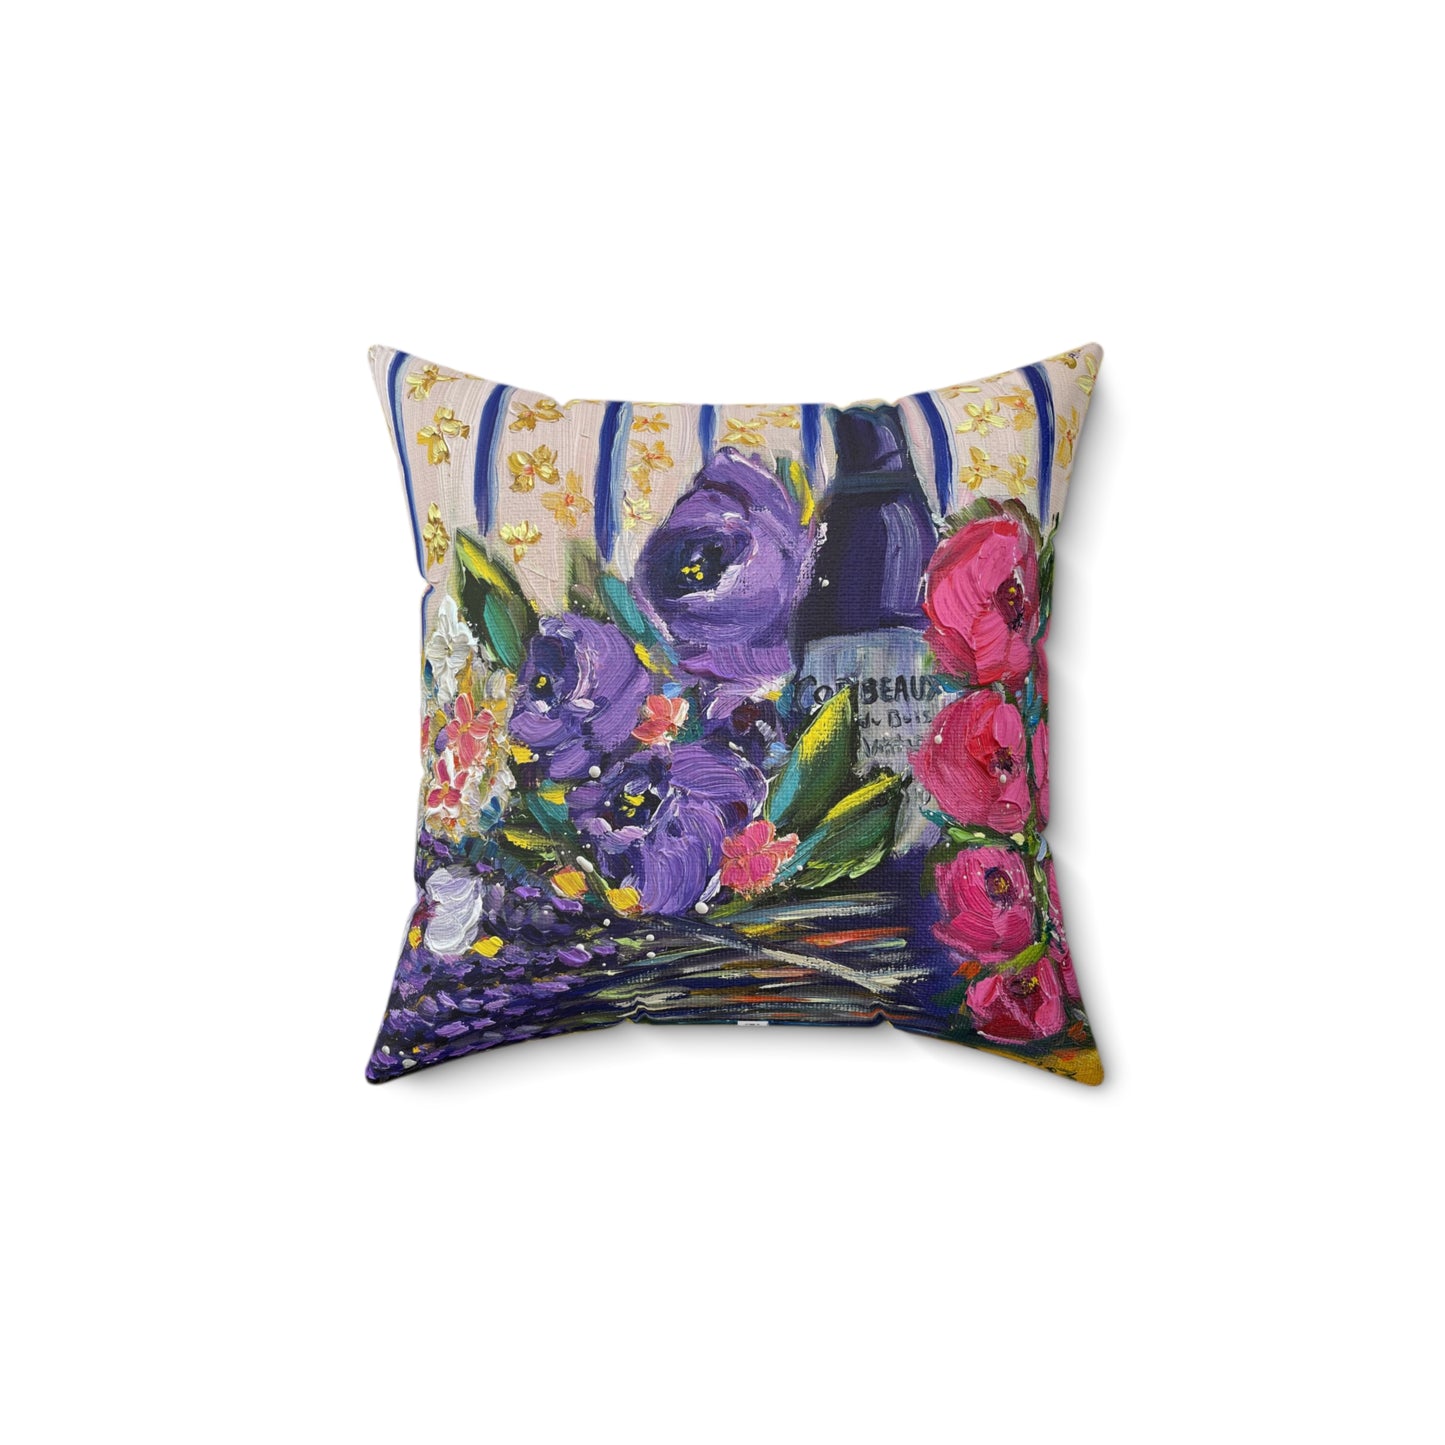 Wine and Lavender- Indoor Spun Polyester Square Pillow